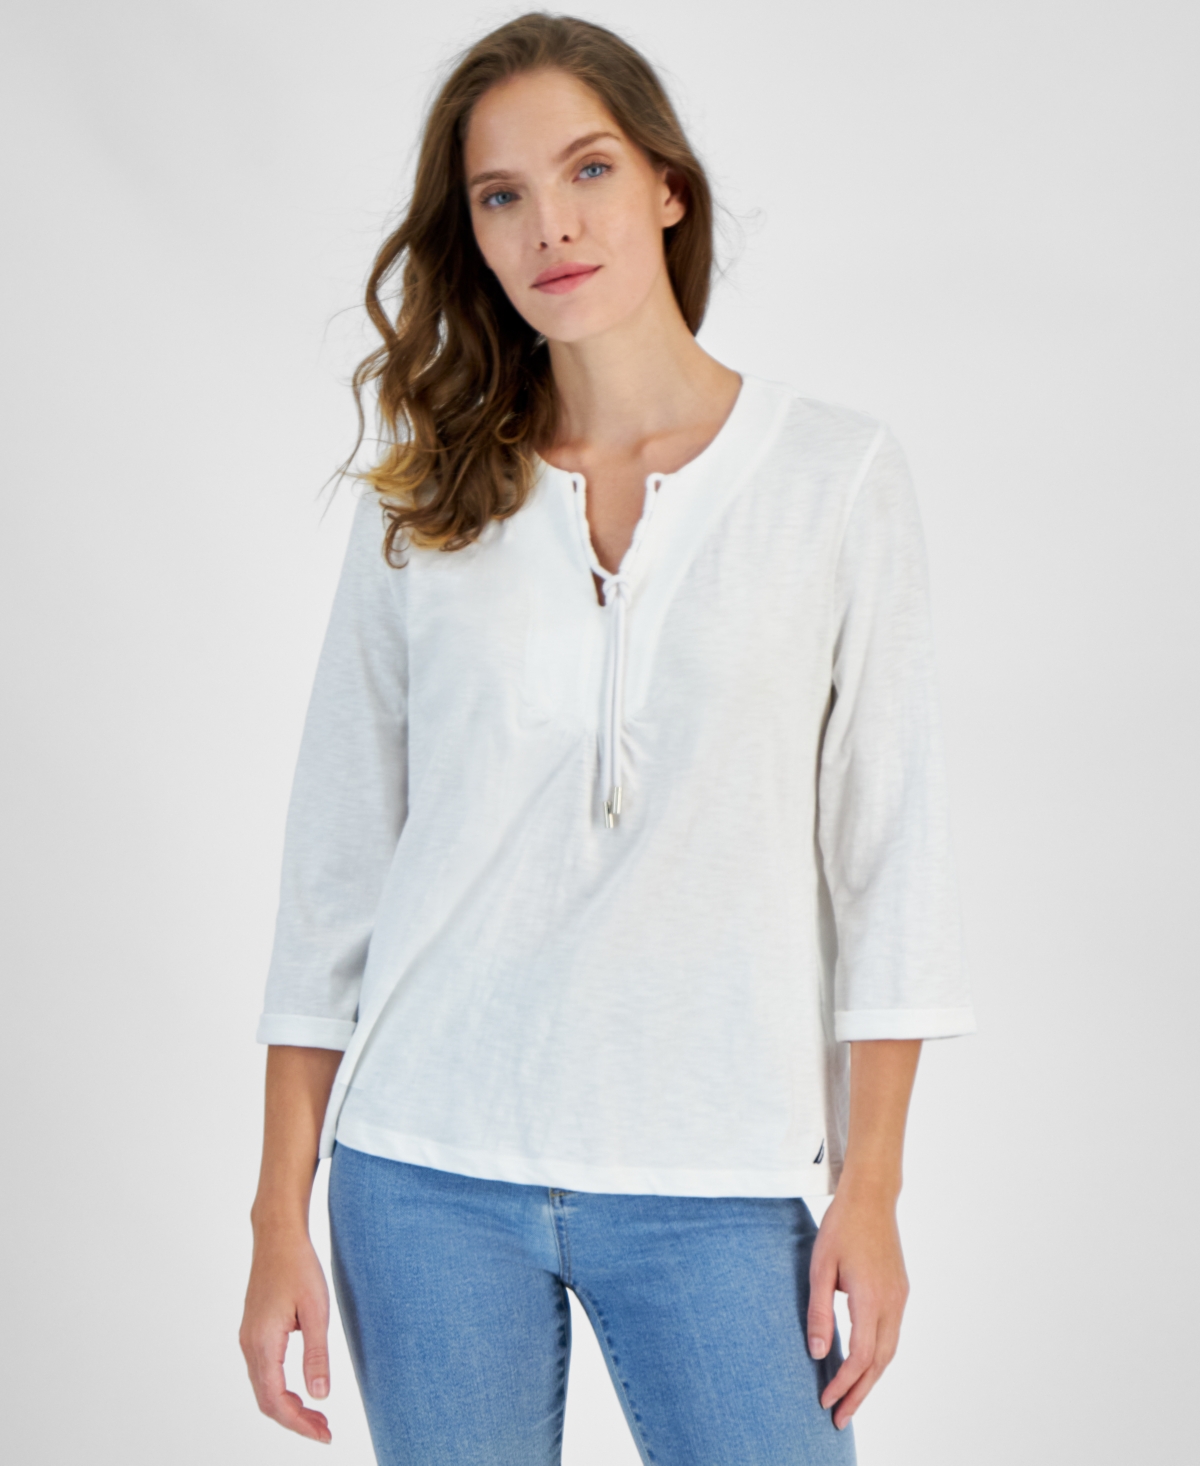 Women's Cotton Lace-Up-Neck 3/4-Sleeve Top - Brt White